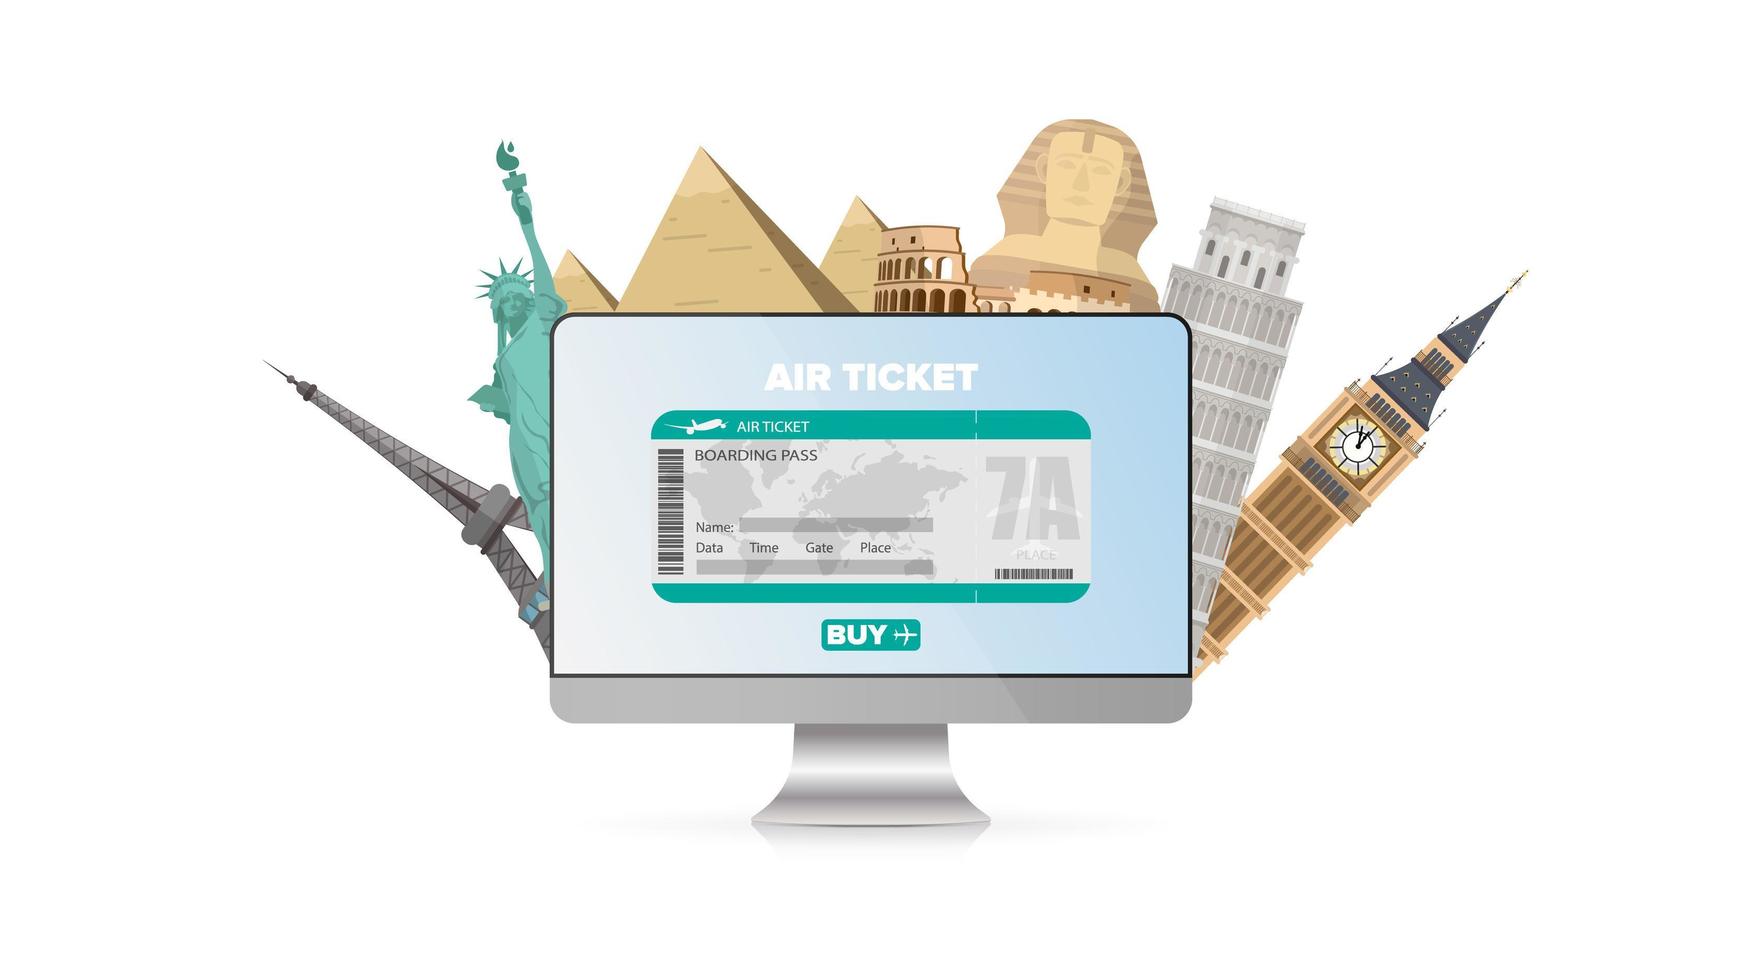 Buying an airline ticket online. Landmarks of the world. Concept for design on the theme of tourism, sale of tours. Monitor, Egyptian pyramids, Eiffel Tower, Statue of Liberty, Wheels, Pezan Tower. vector